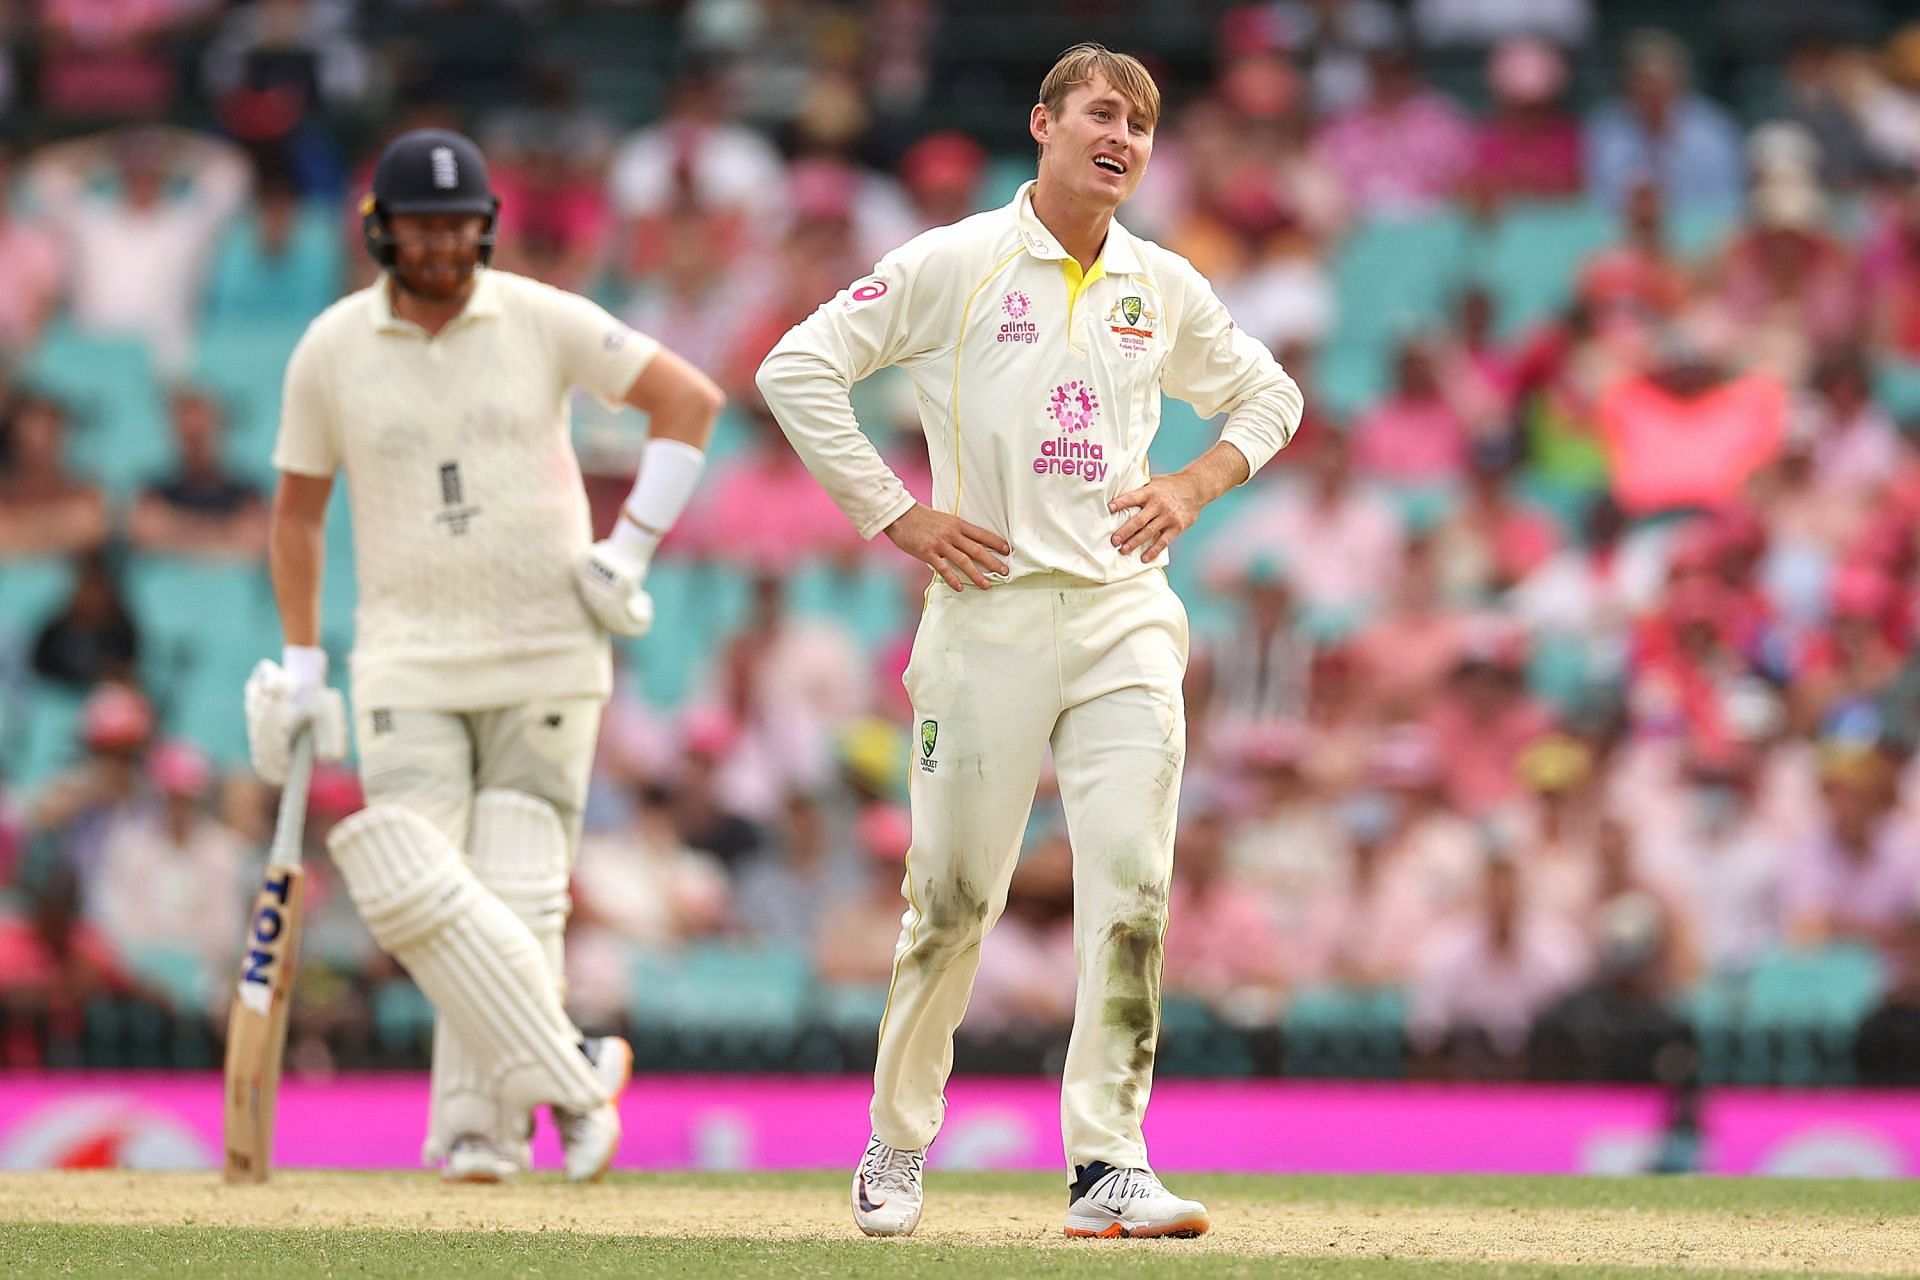 Ashes 2021-22: Marnus Labuschagne had his lone, enthusiastic appeal turned down on the final day at the Sydney Cricket Ground.